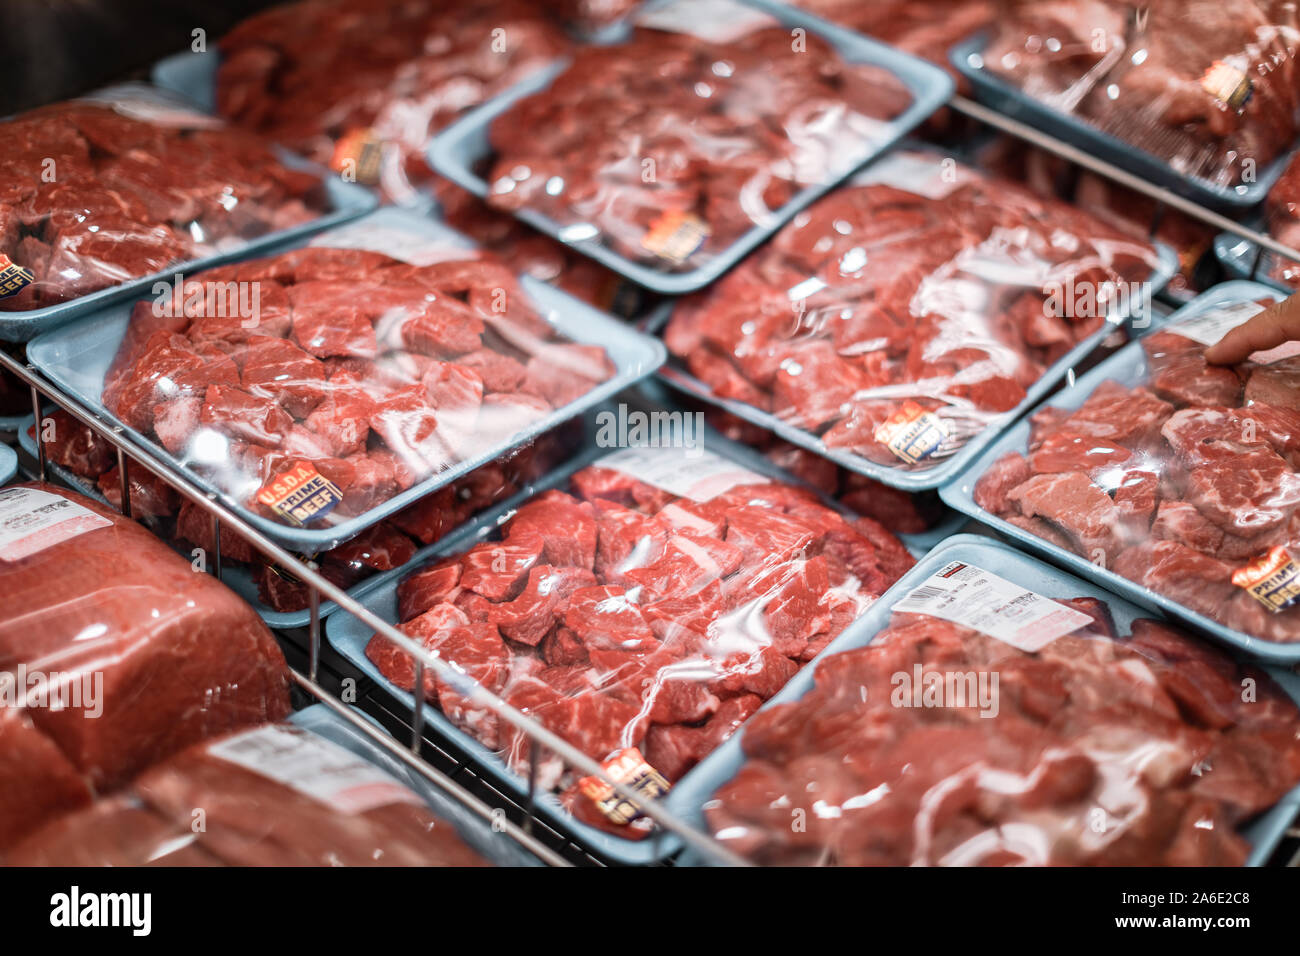 Tigard, Oregon - Oct 25, 2019 : Packed raw meat on plastic tray at Costco Wholesale Stock Photo